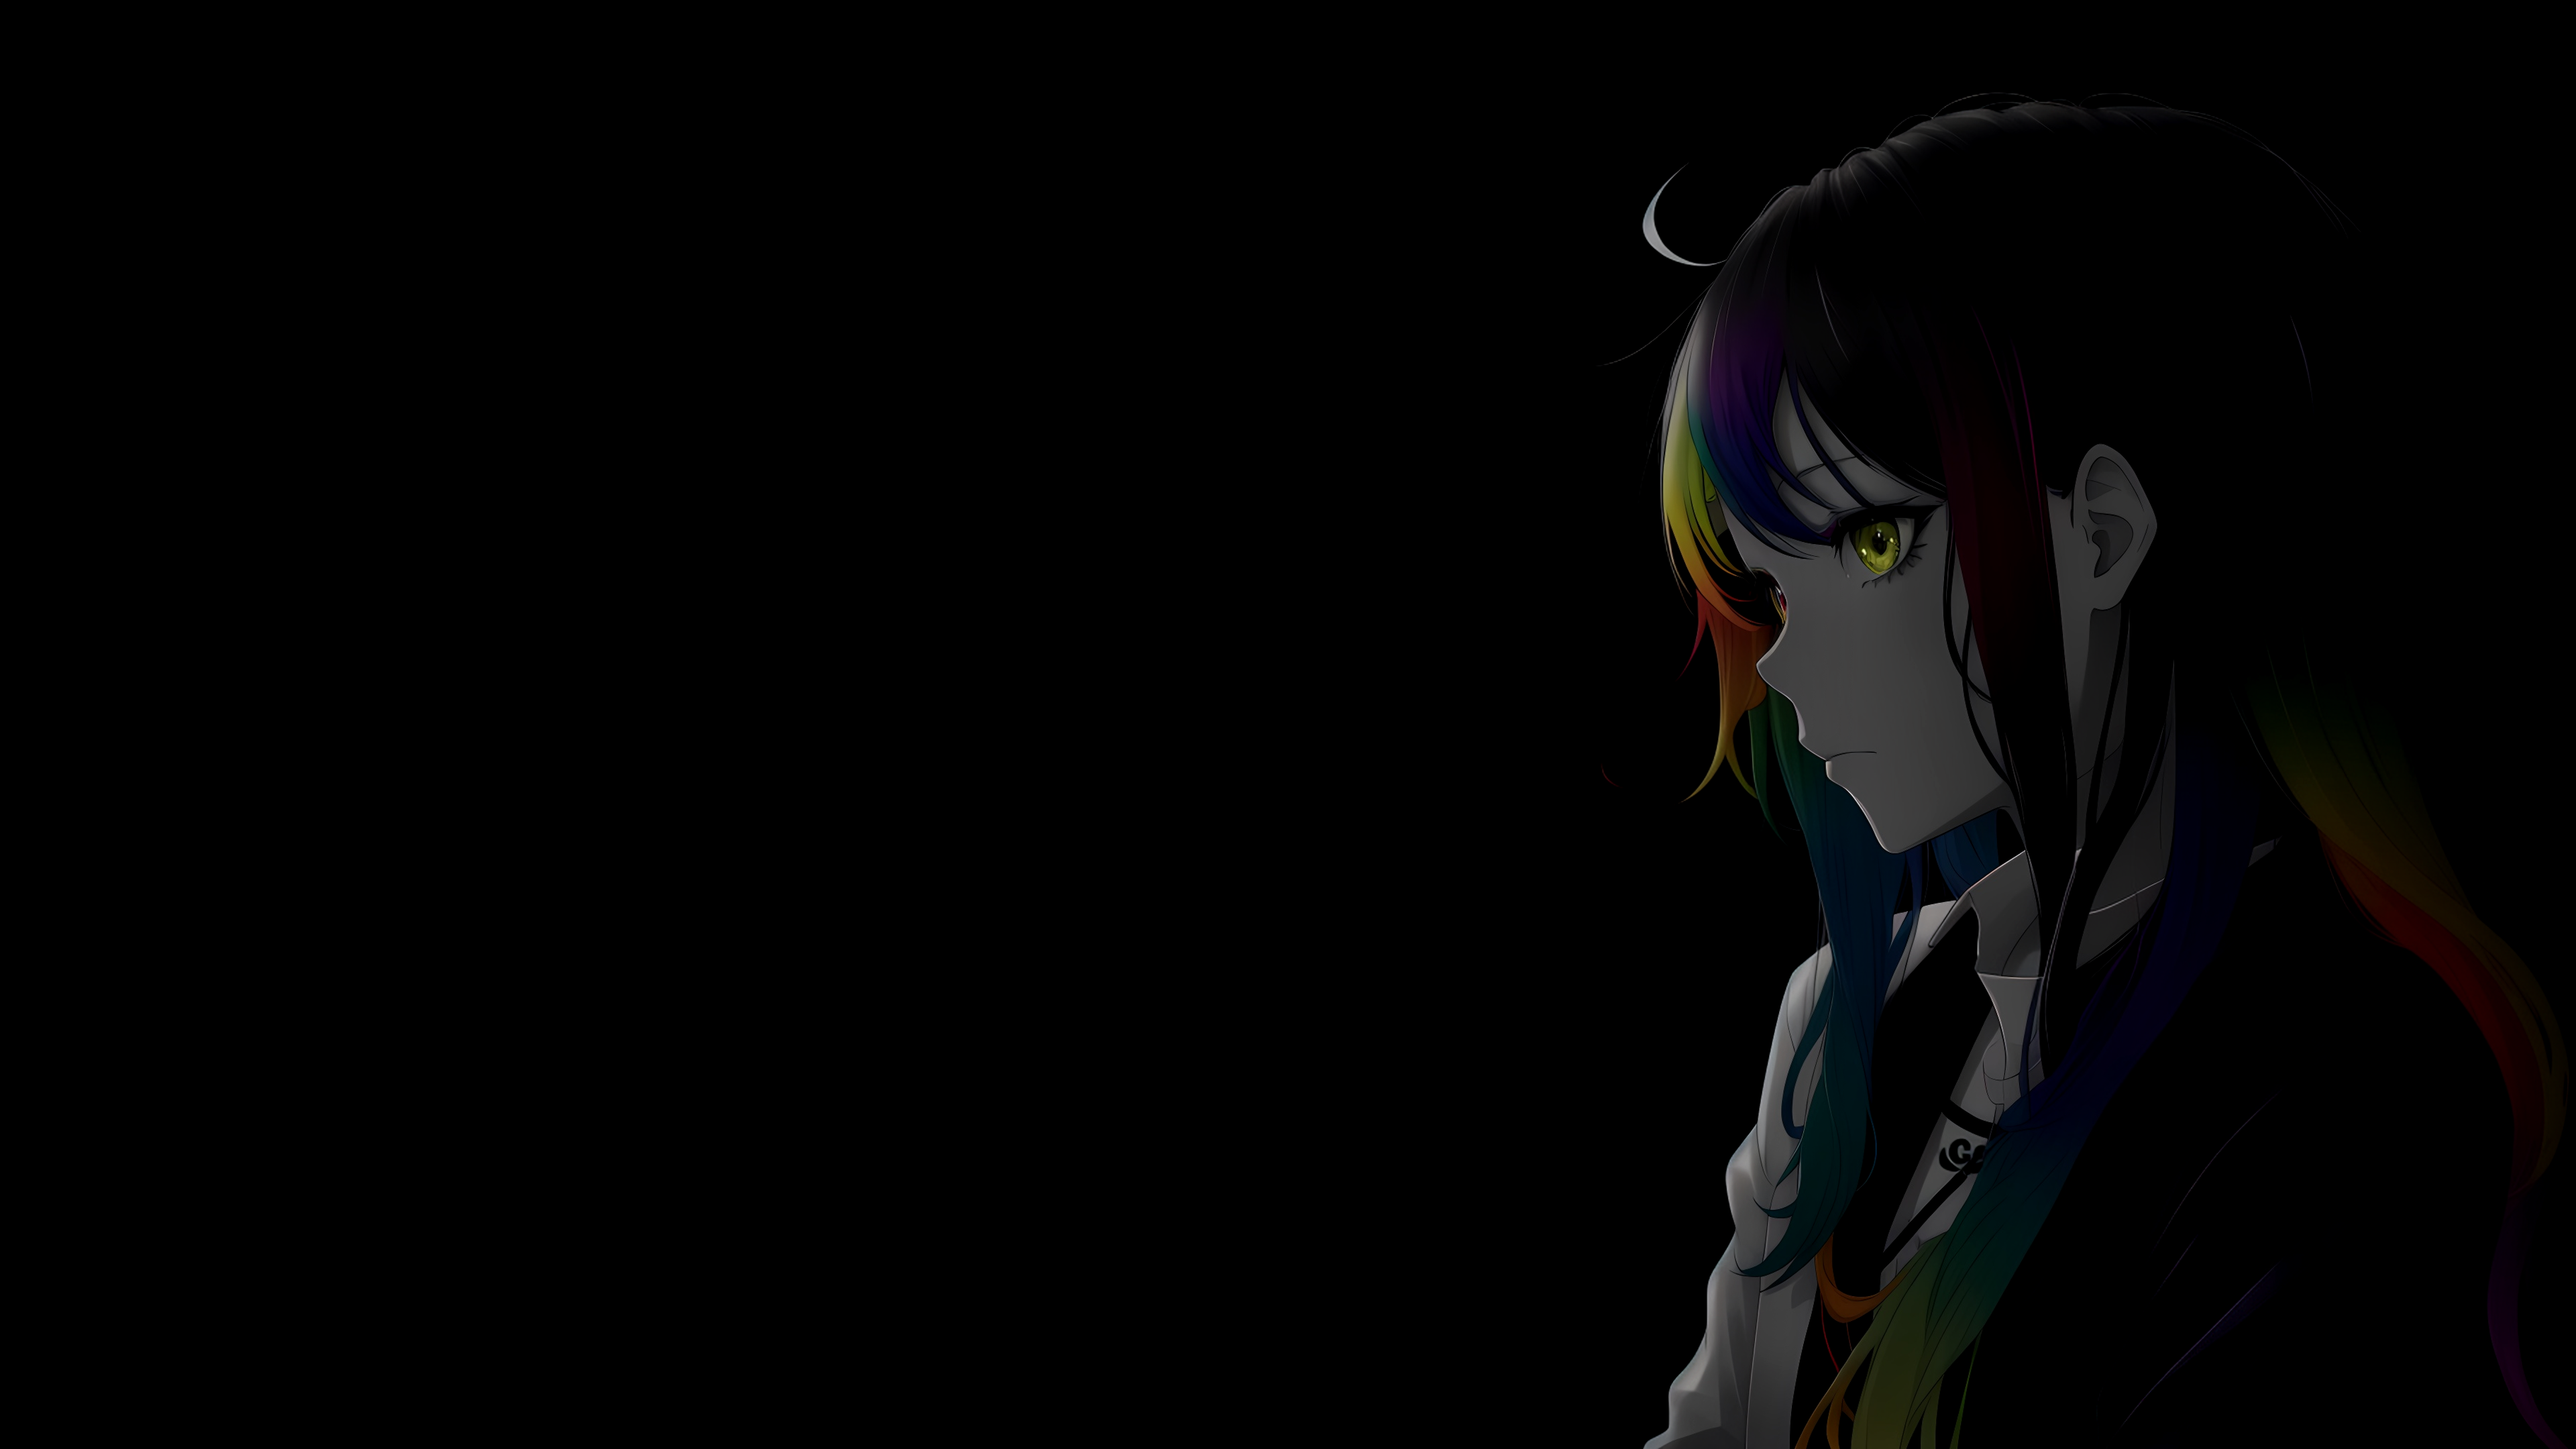 Ai Assisted Black Background Selective Coloring Anime Girls Multi Colored Hair Minimalism Heterochro 3840x2160